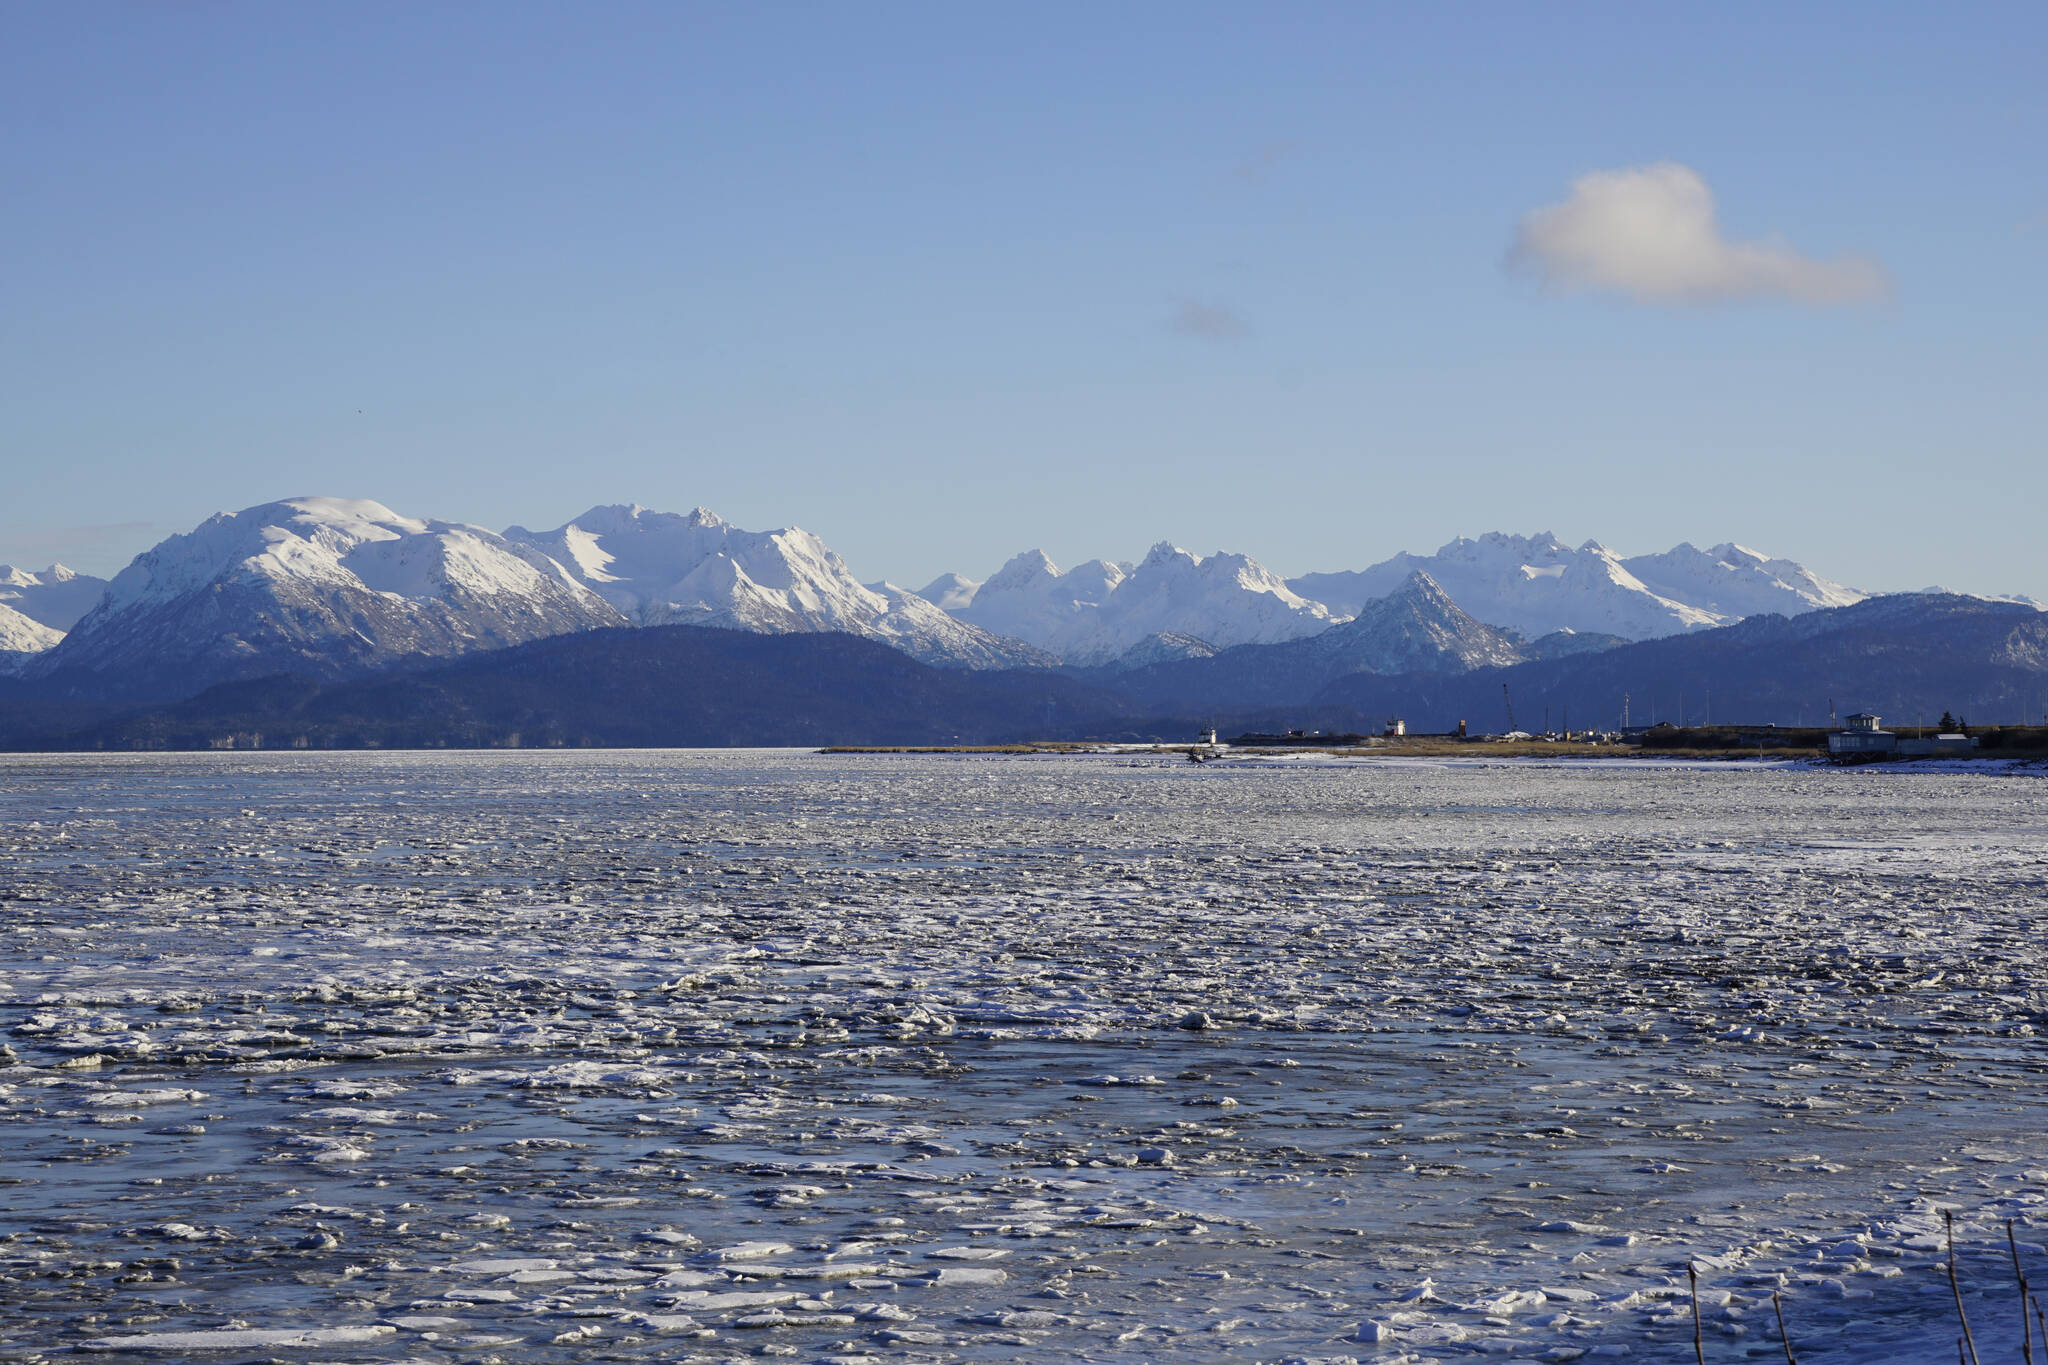 Ice has begun to fill Mud Bay, as seen from the Homer Spit on Tuesday, Nov. 17, 2021, in Homer, Alaska. (Photo by Michael Armstrong/Homer News)